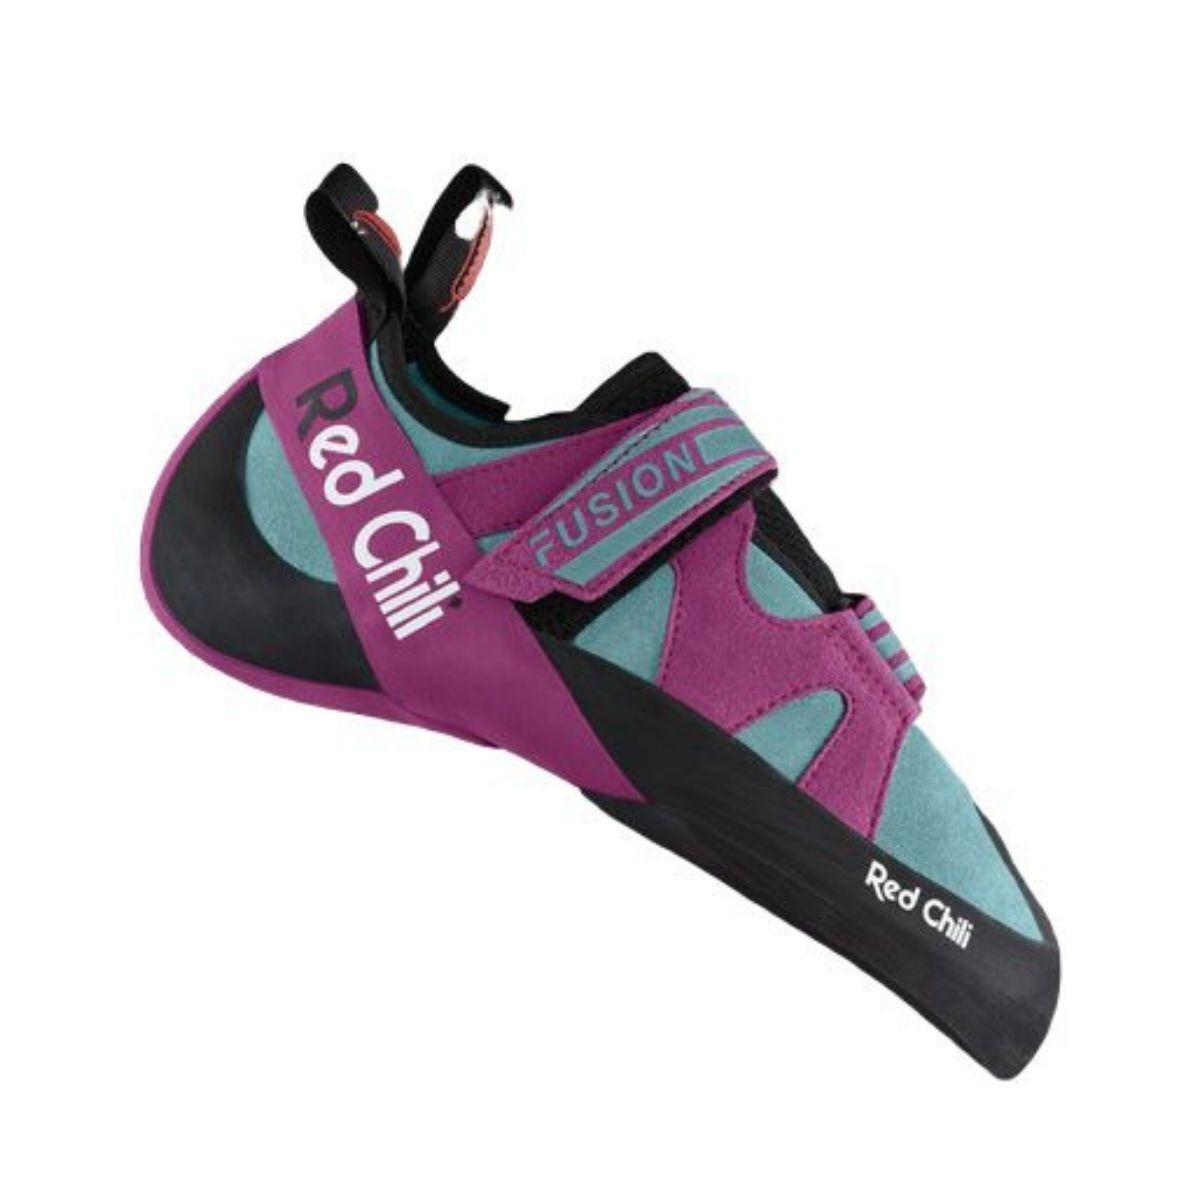 Red Chili Fusion Lady VCR  - Climbing shoes - Women's